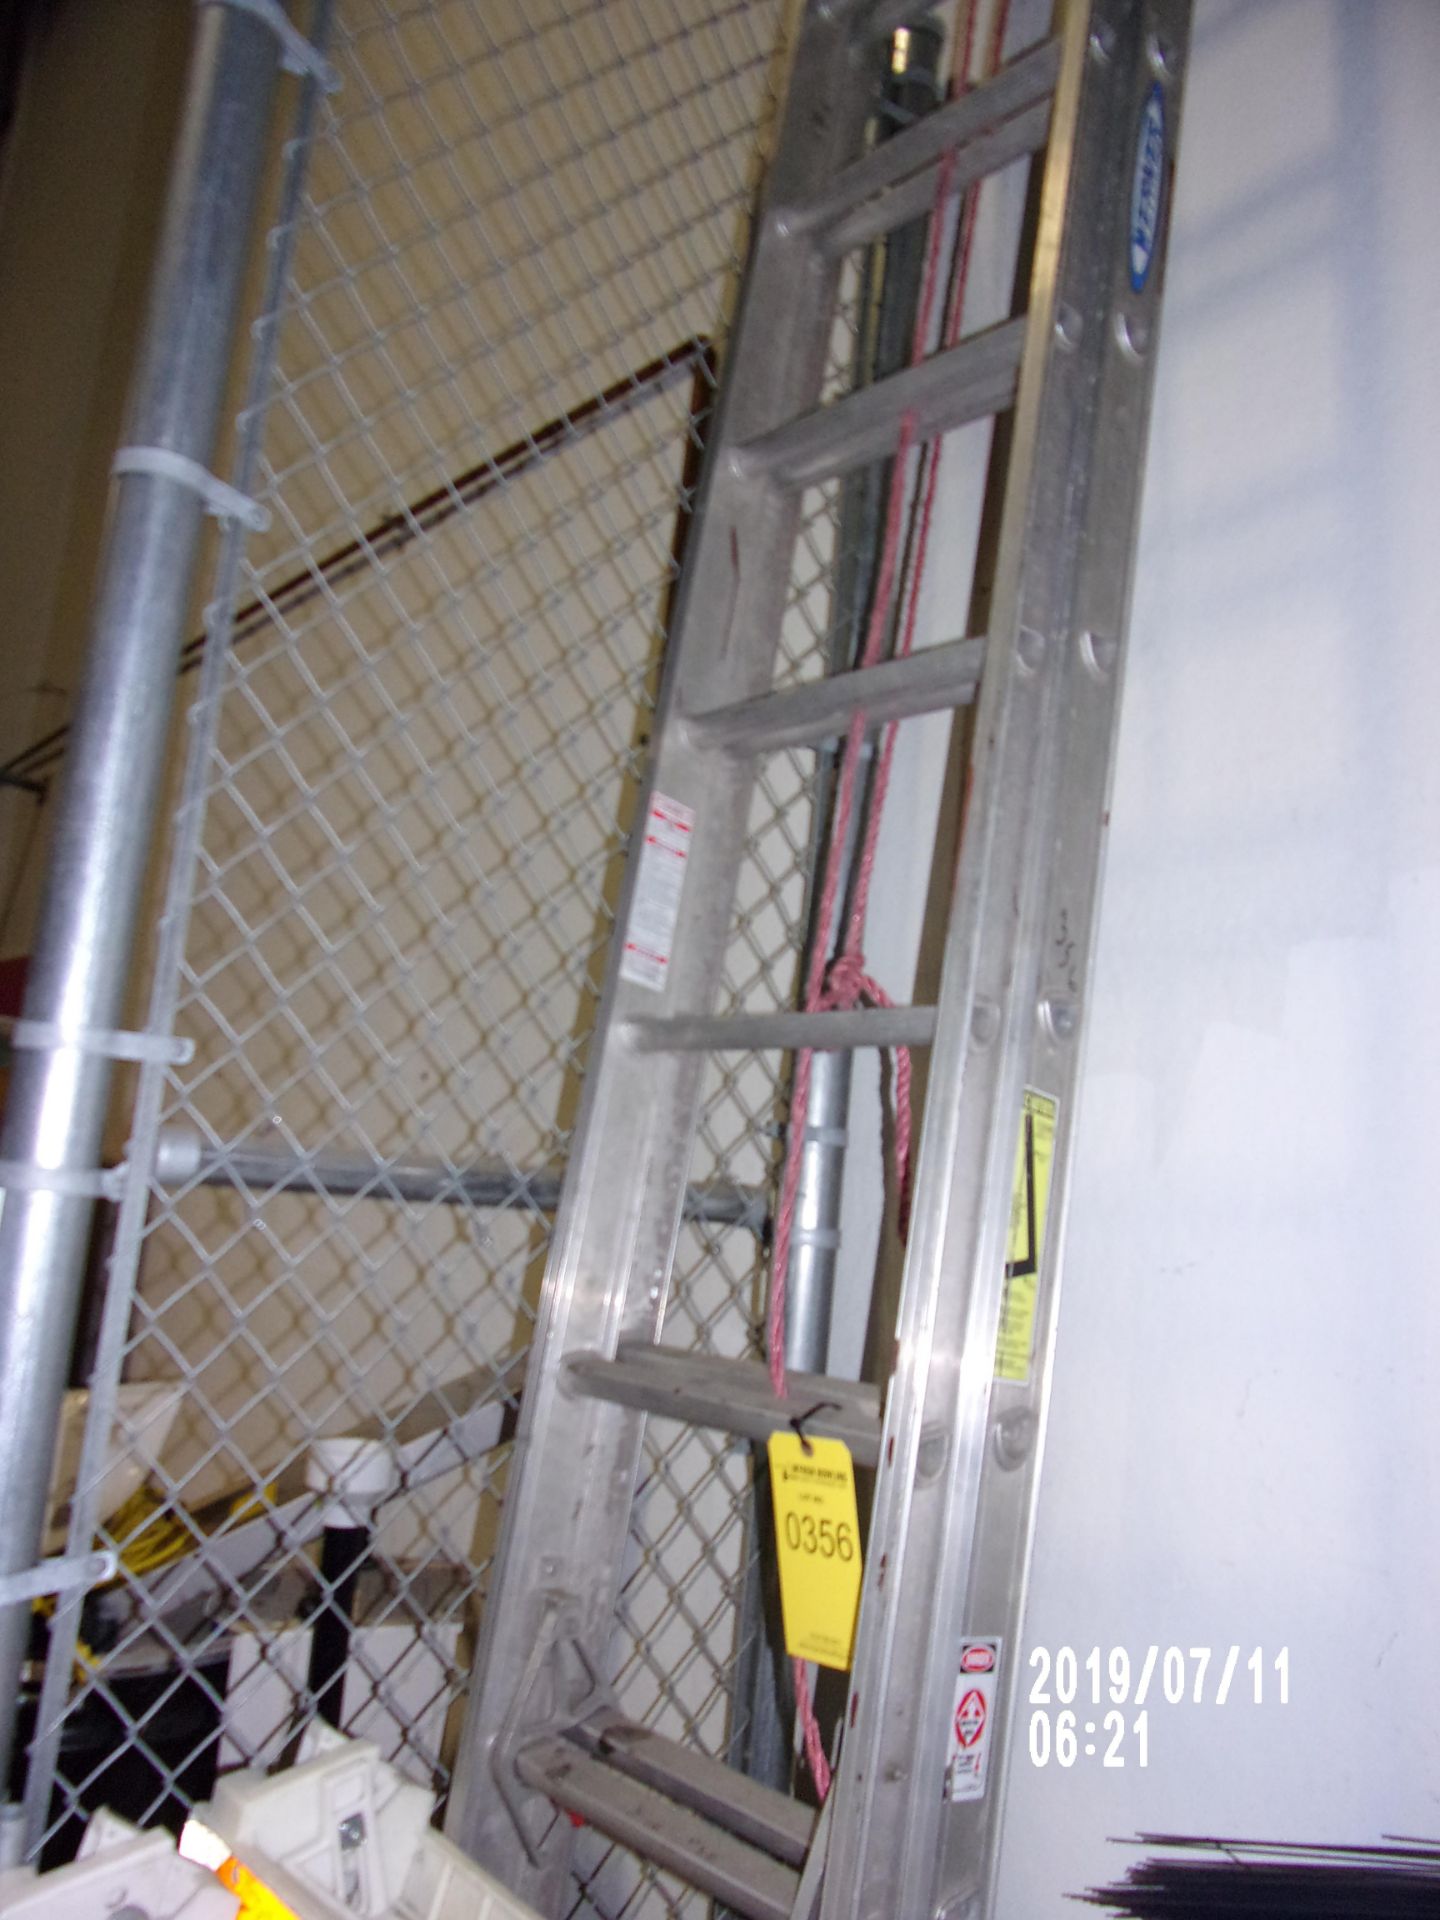 WERNER EXTENSION LADDER ***GO TO LUNCH ROOM***